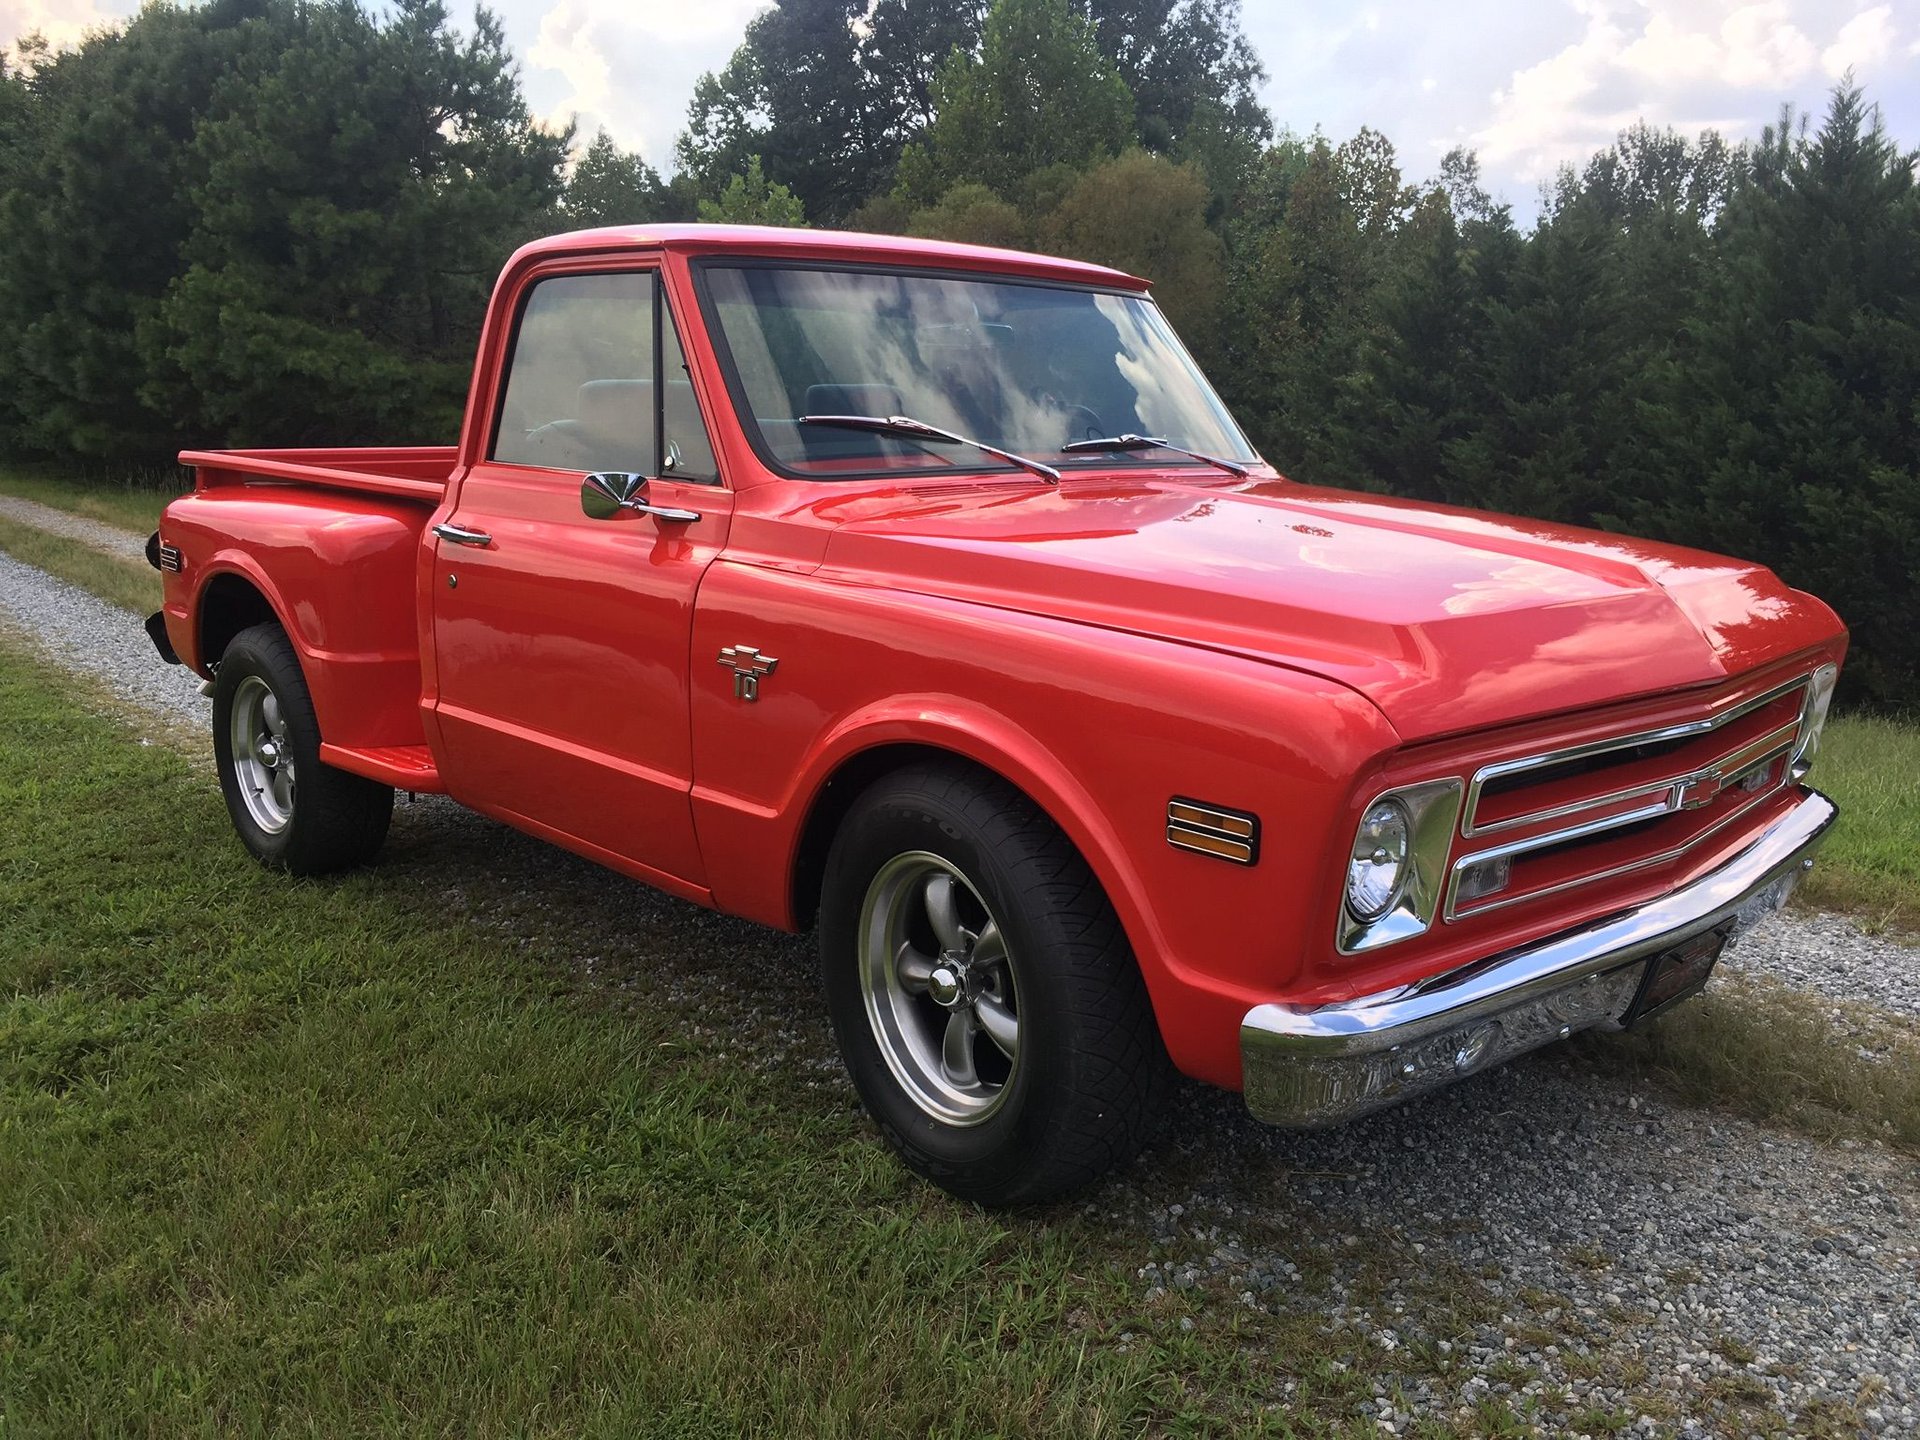 1969 Chevy Stepside Pickup Truck For Sale